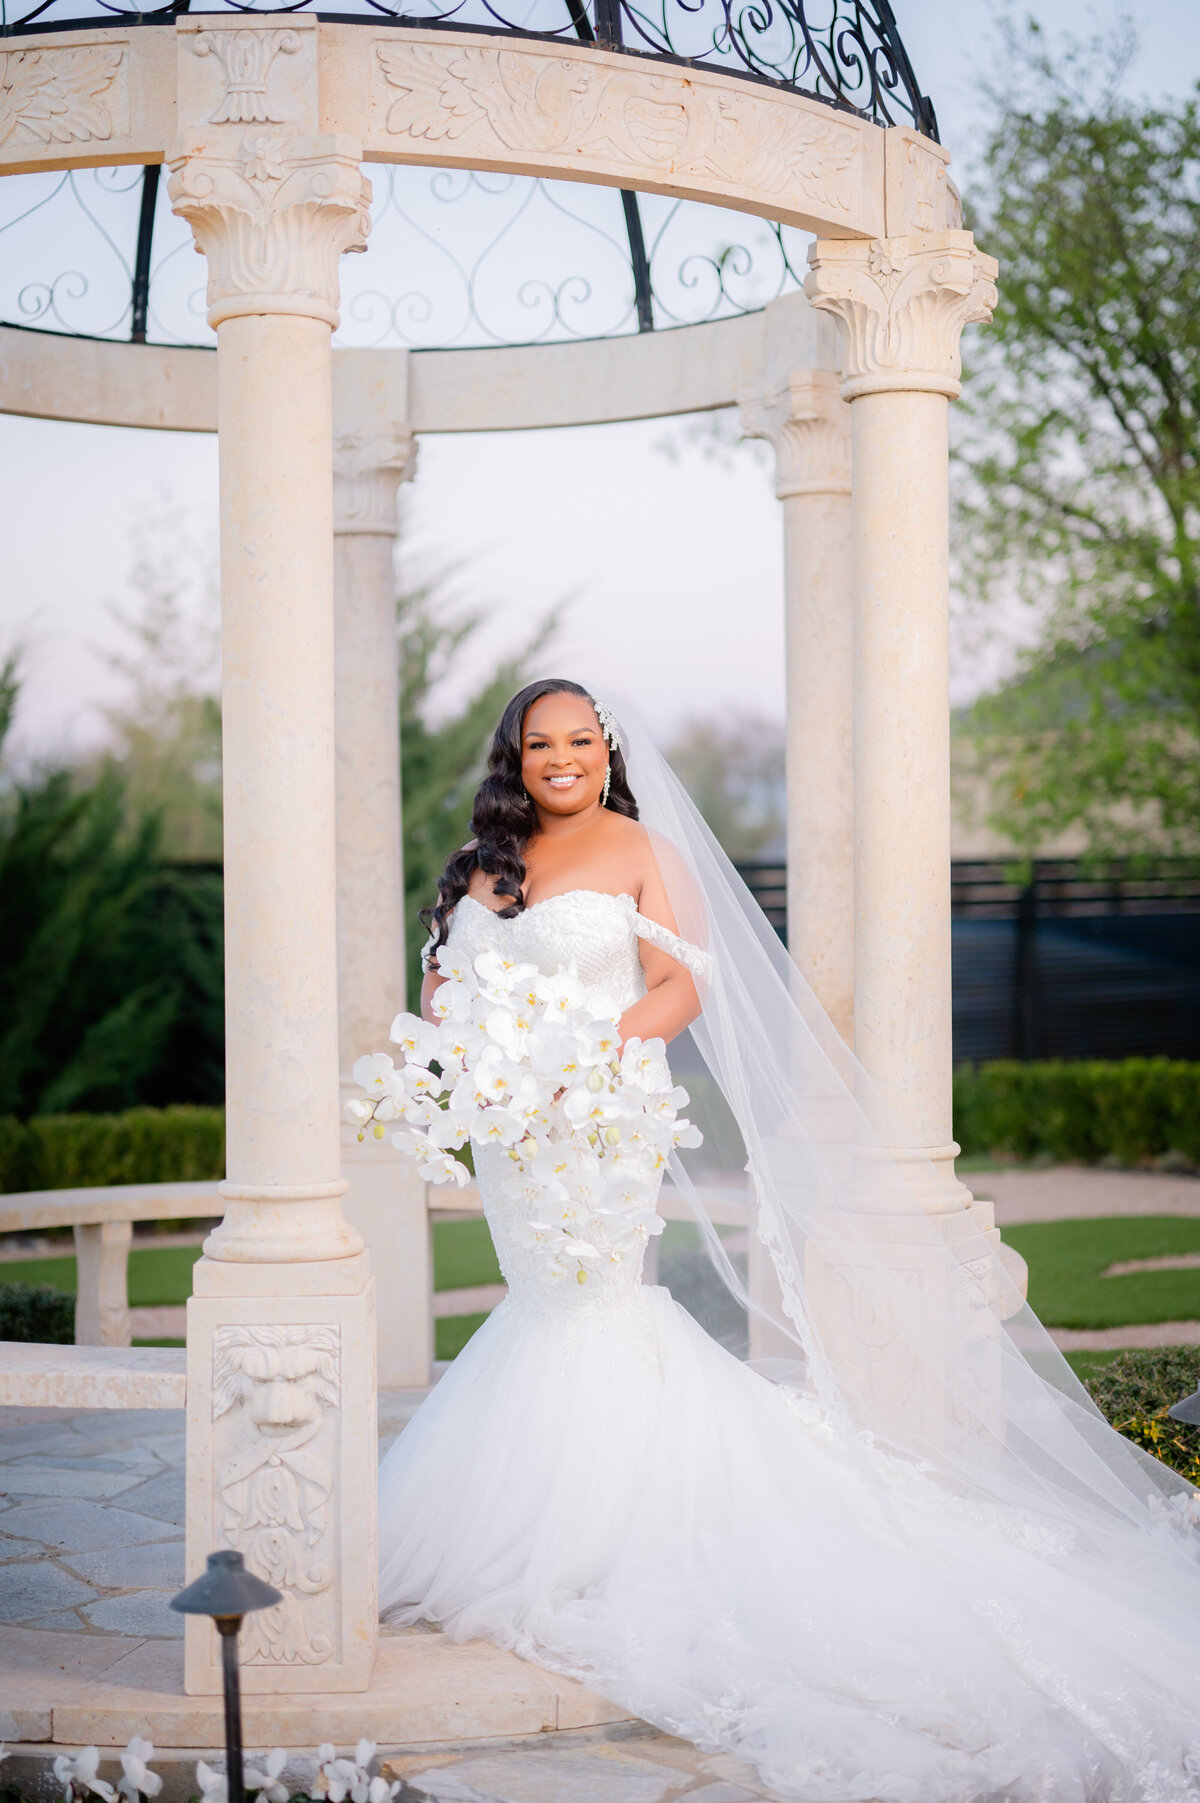 Wedding at Knotting Hill Place in Little Elm, Texas - 54